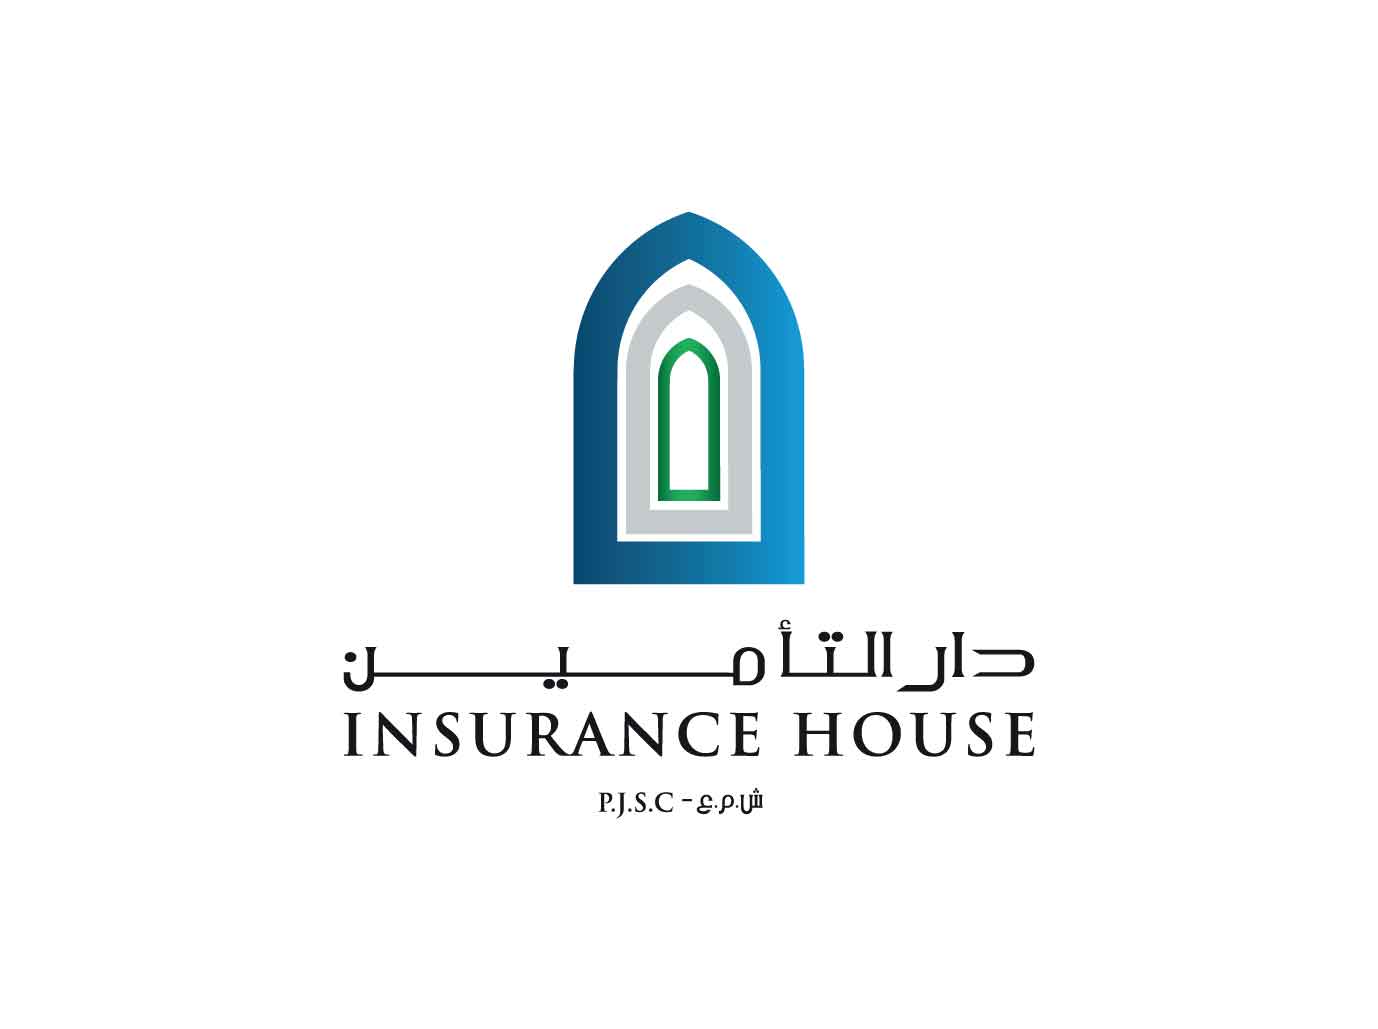 Insurance House Strategic Transformation Paves the Way for Future Progress